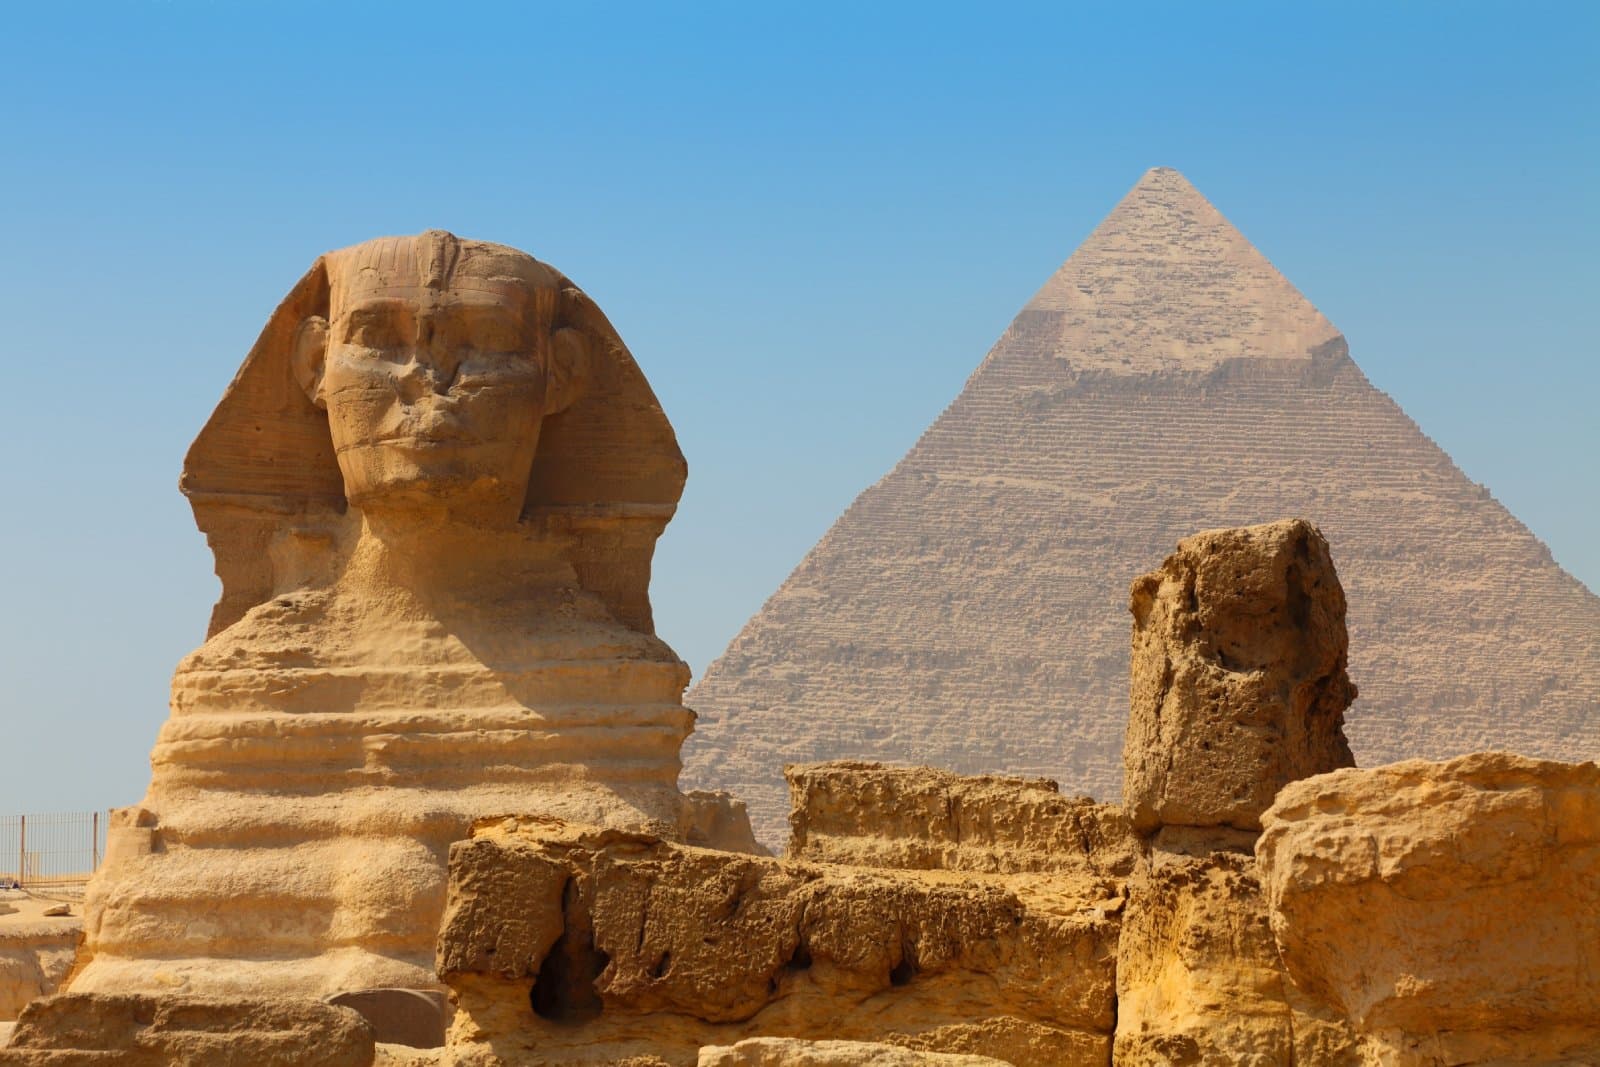 <p class="wp-caption-text">Image Credit: Shutterstock / mareandmare</p>  <p>While awe-inspiring, the experience can be marred by aggressive souvenir sellers and the nearby hustle and bustle of Cairo, detracting from the ancient wonder.</p>